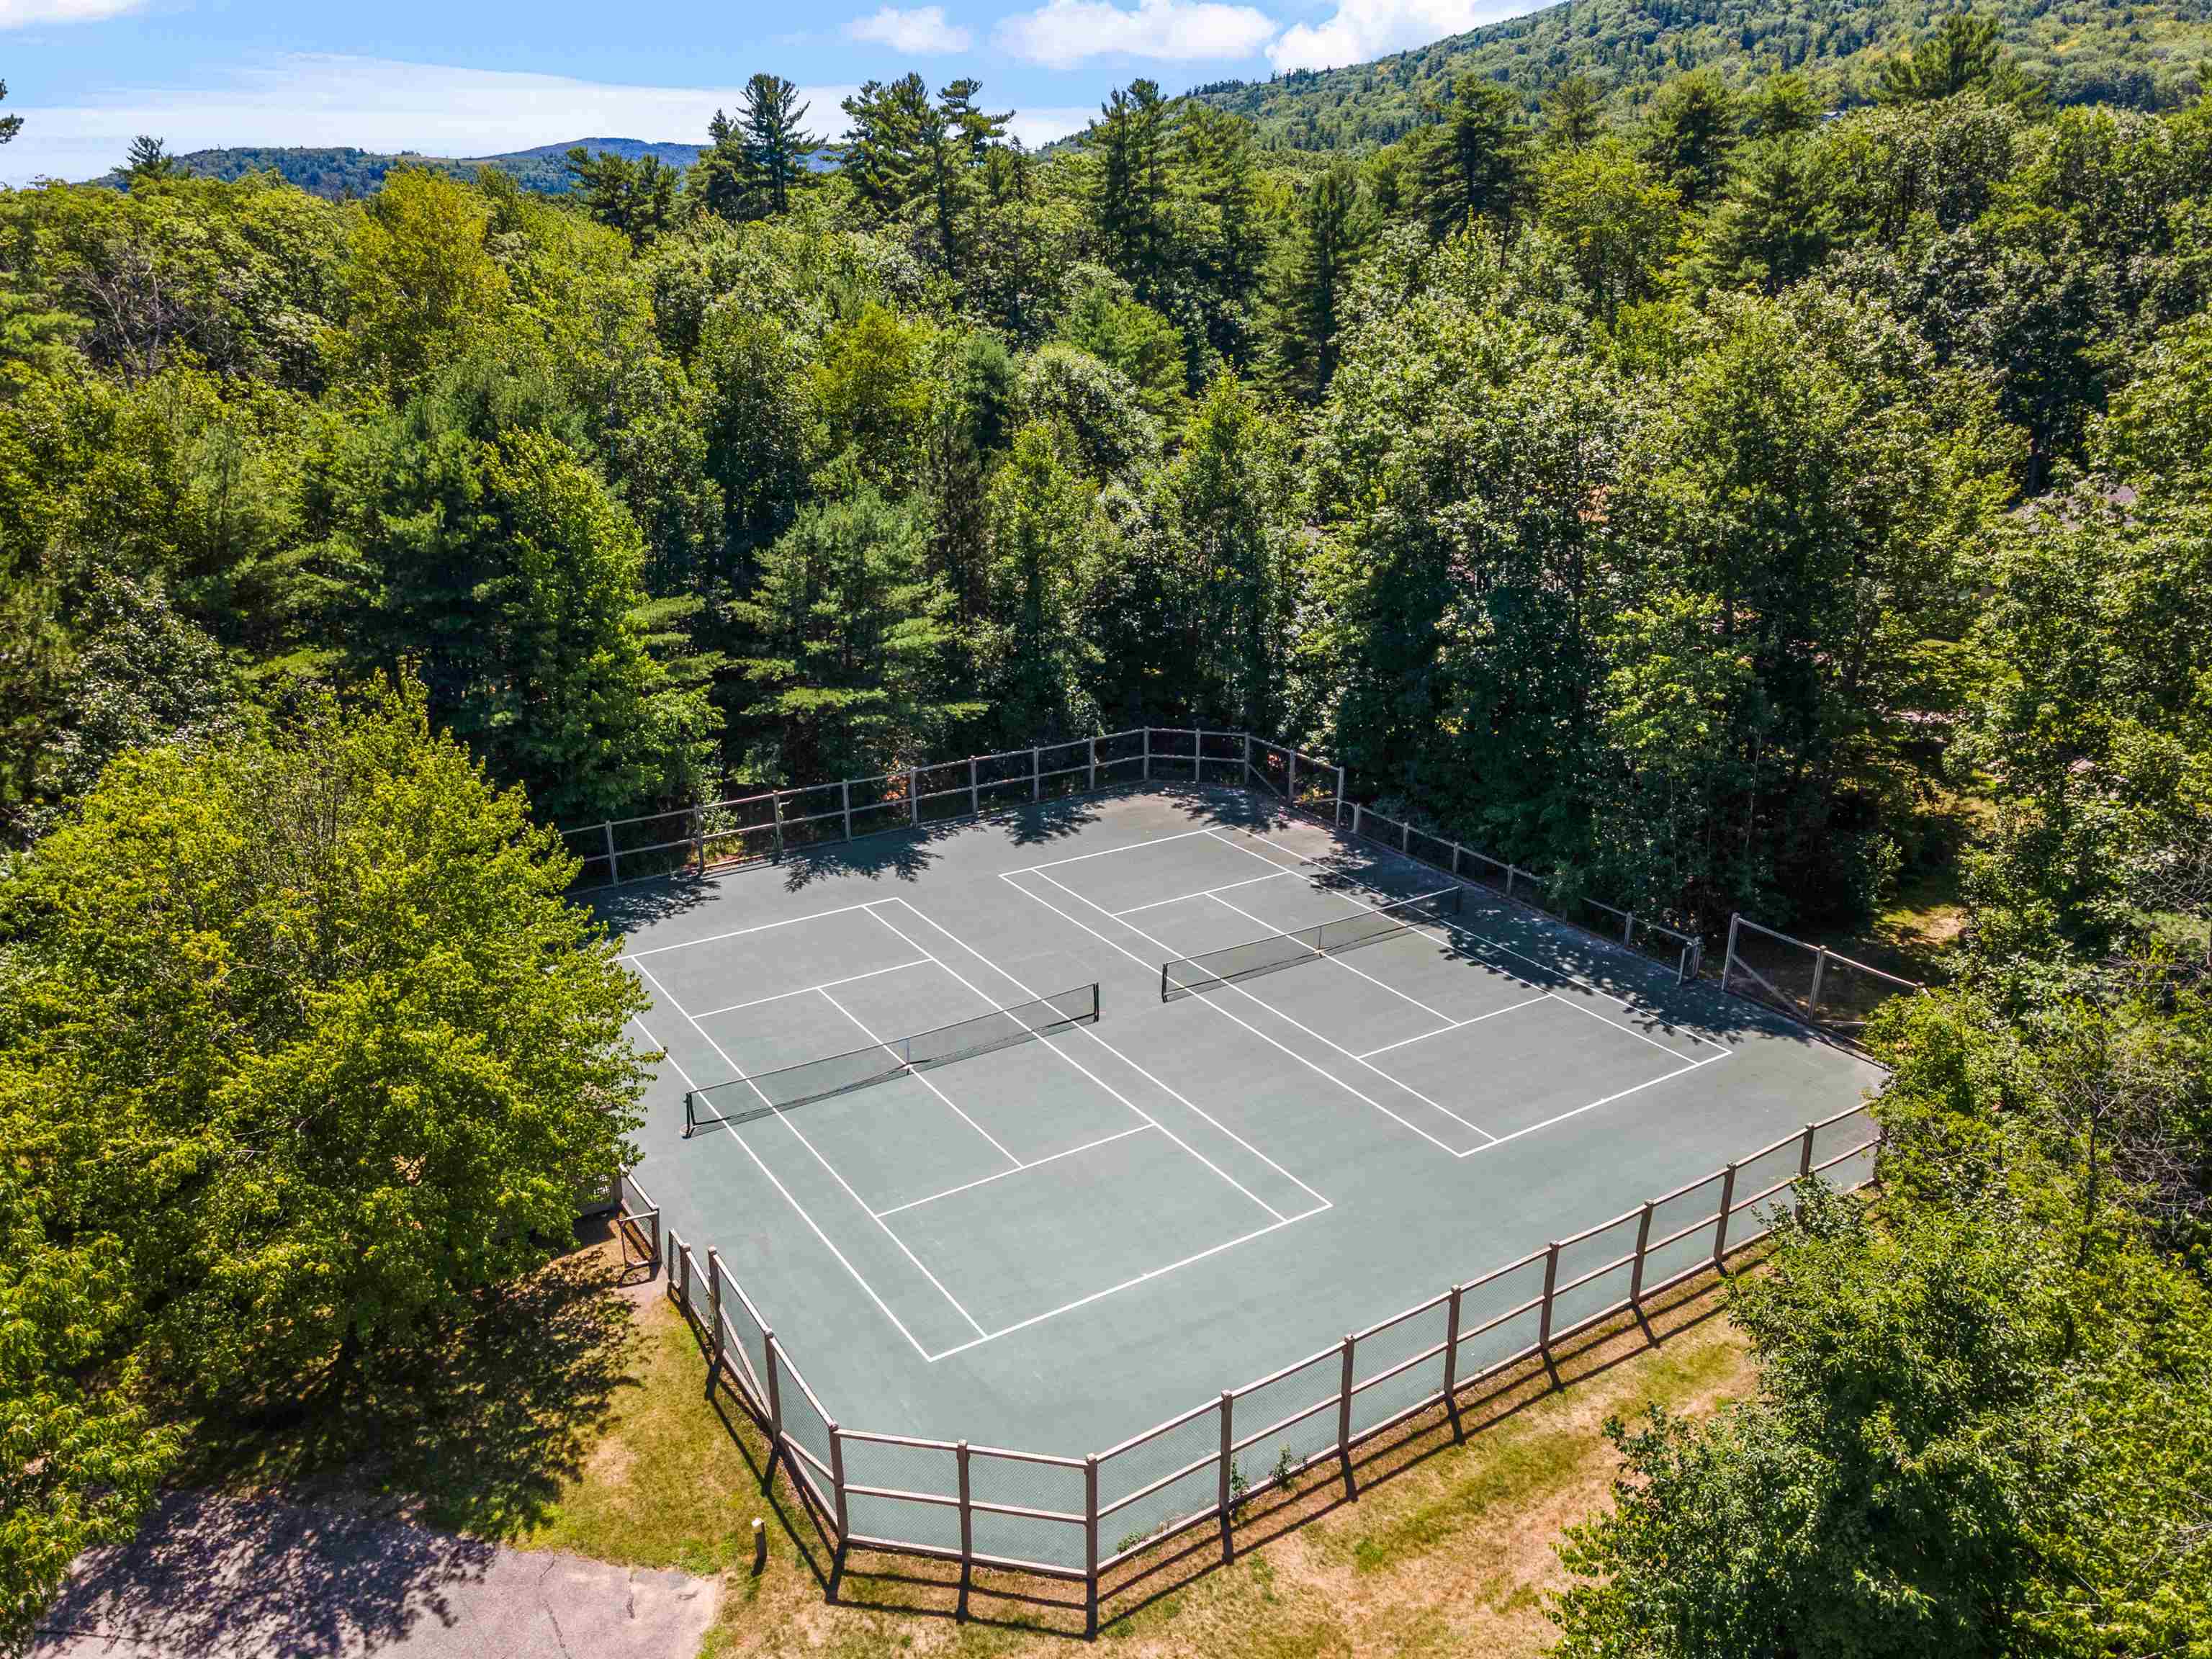 Tennis courts and basketball courts